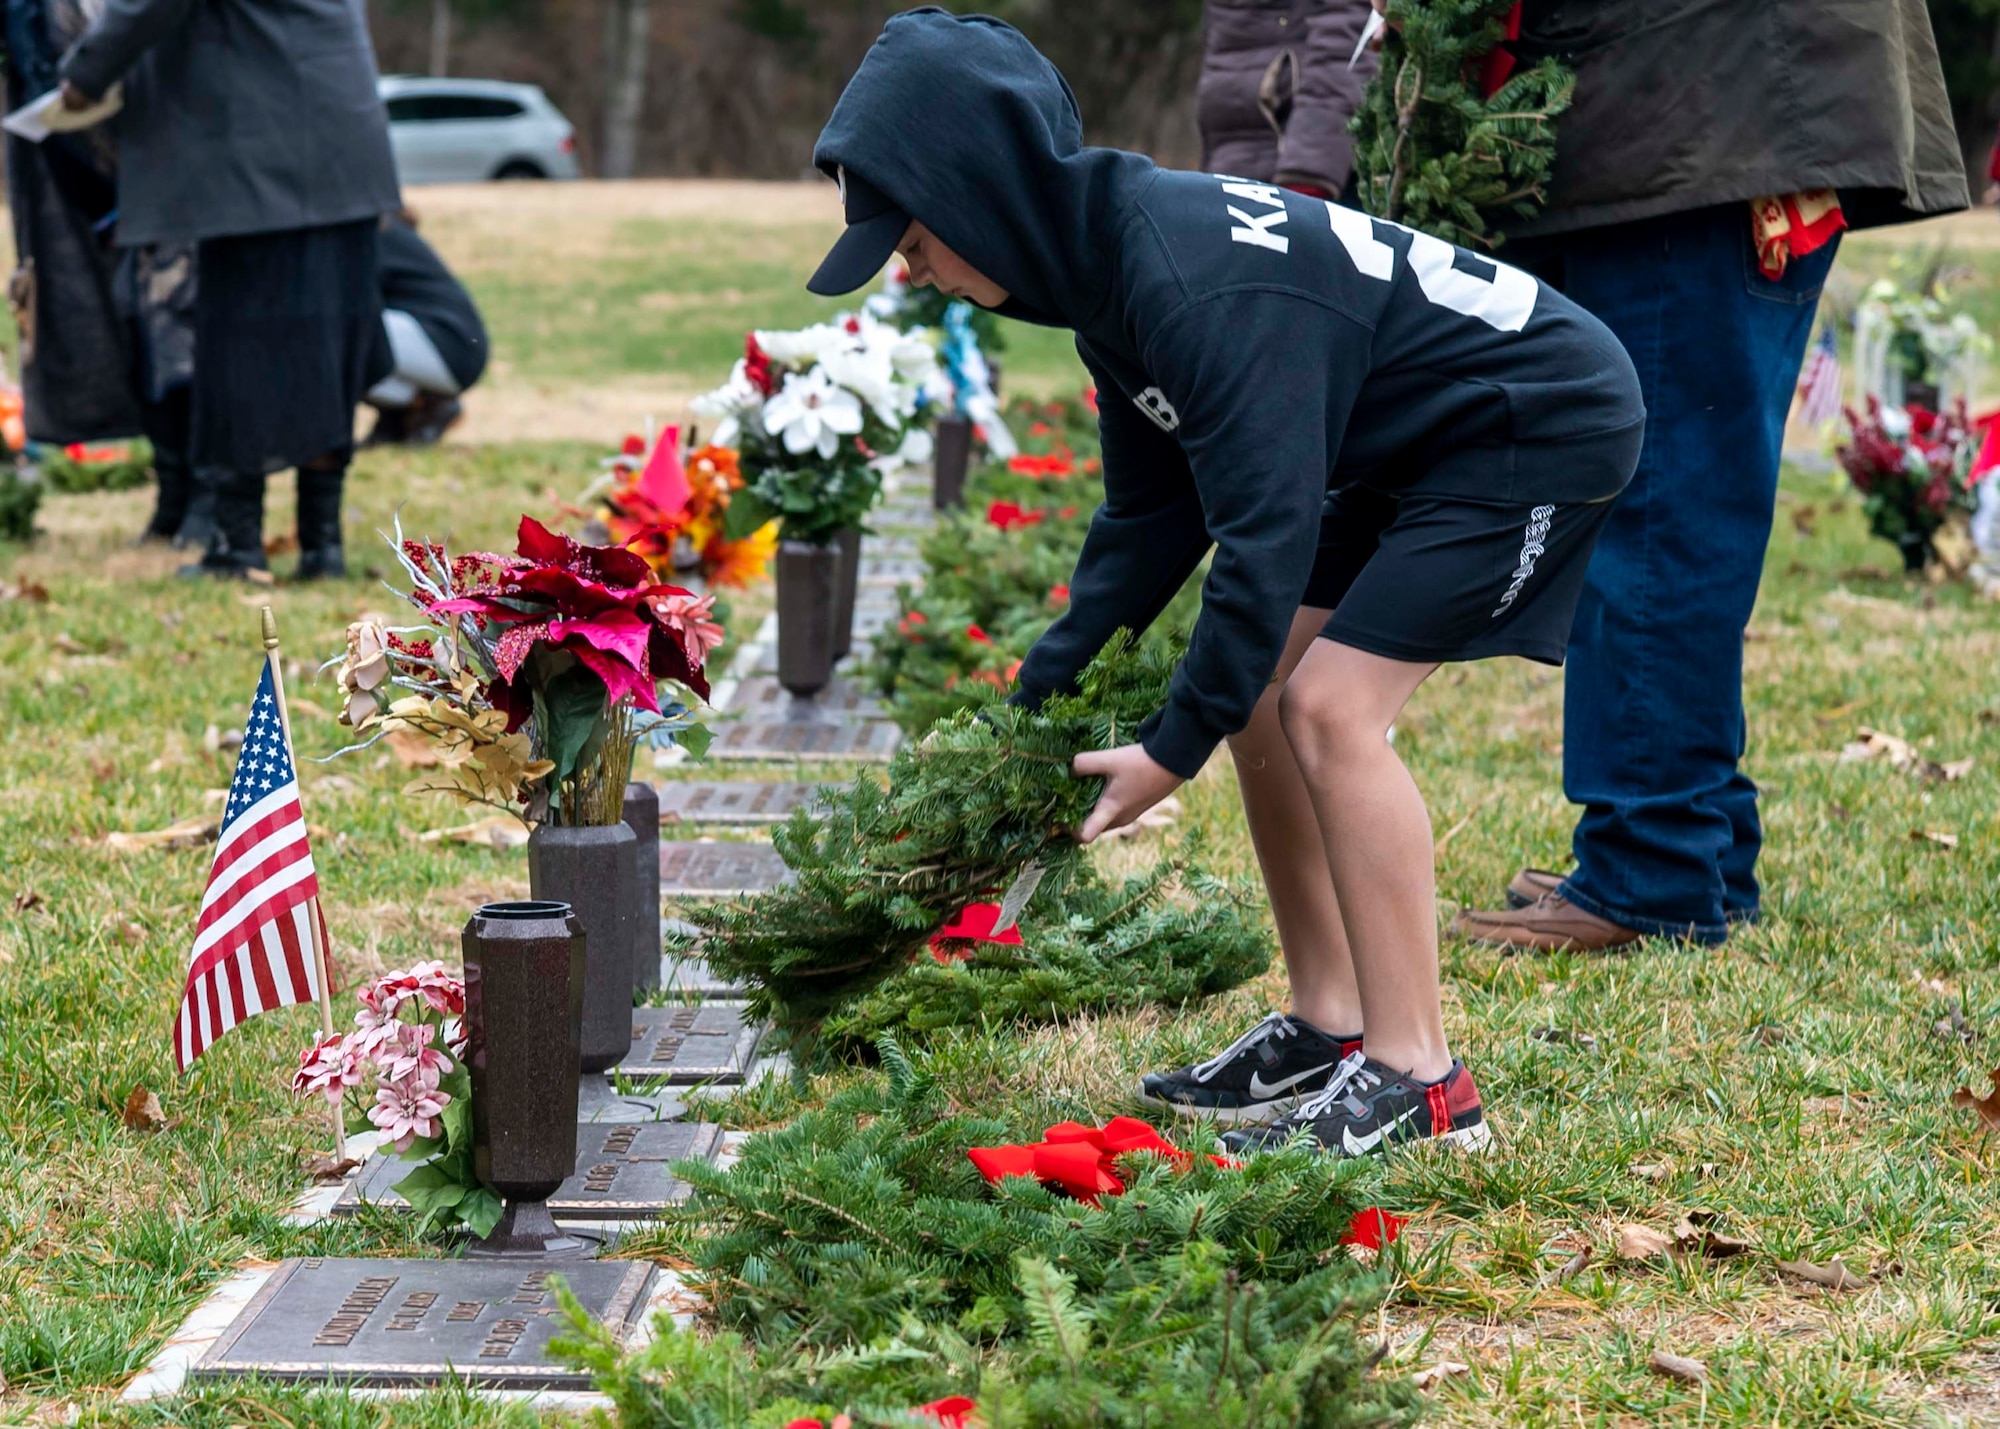 A volunteer places a wreath on a grave at the Delaware Veterans Memorial Cemetery in Millsboro, Delaware, Dec. 18, 2021. Each December, on National Wreaths Across America Day, wreath laying ceremonies are held across the country at more than 2,100 cemeteries, honoring veterans and those who have fallen. (U.S. Air Force photo by Senior Airman Stephani Barge)